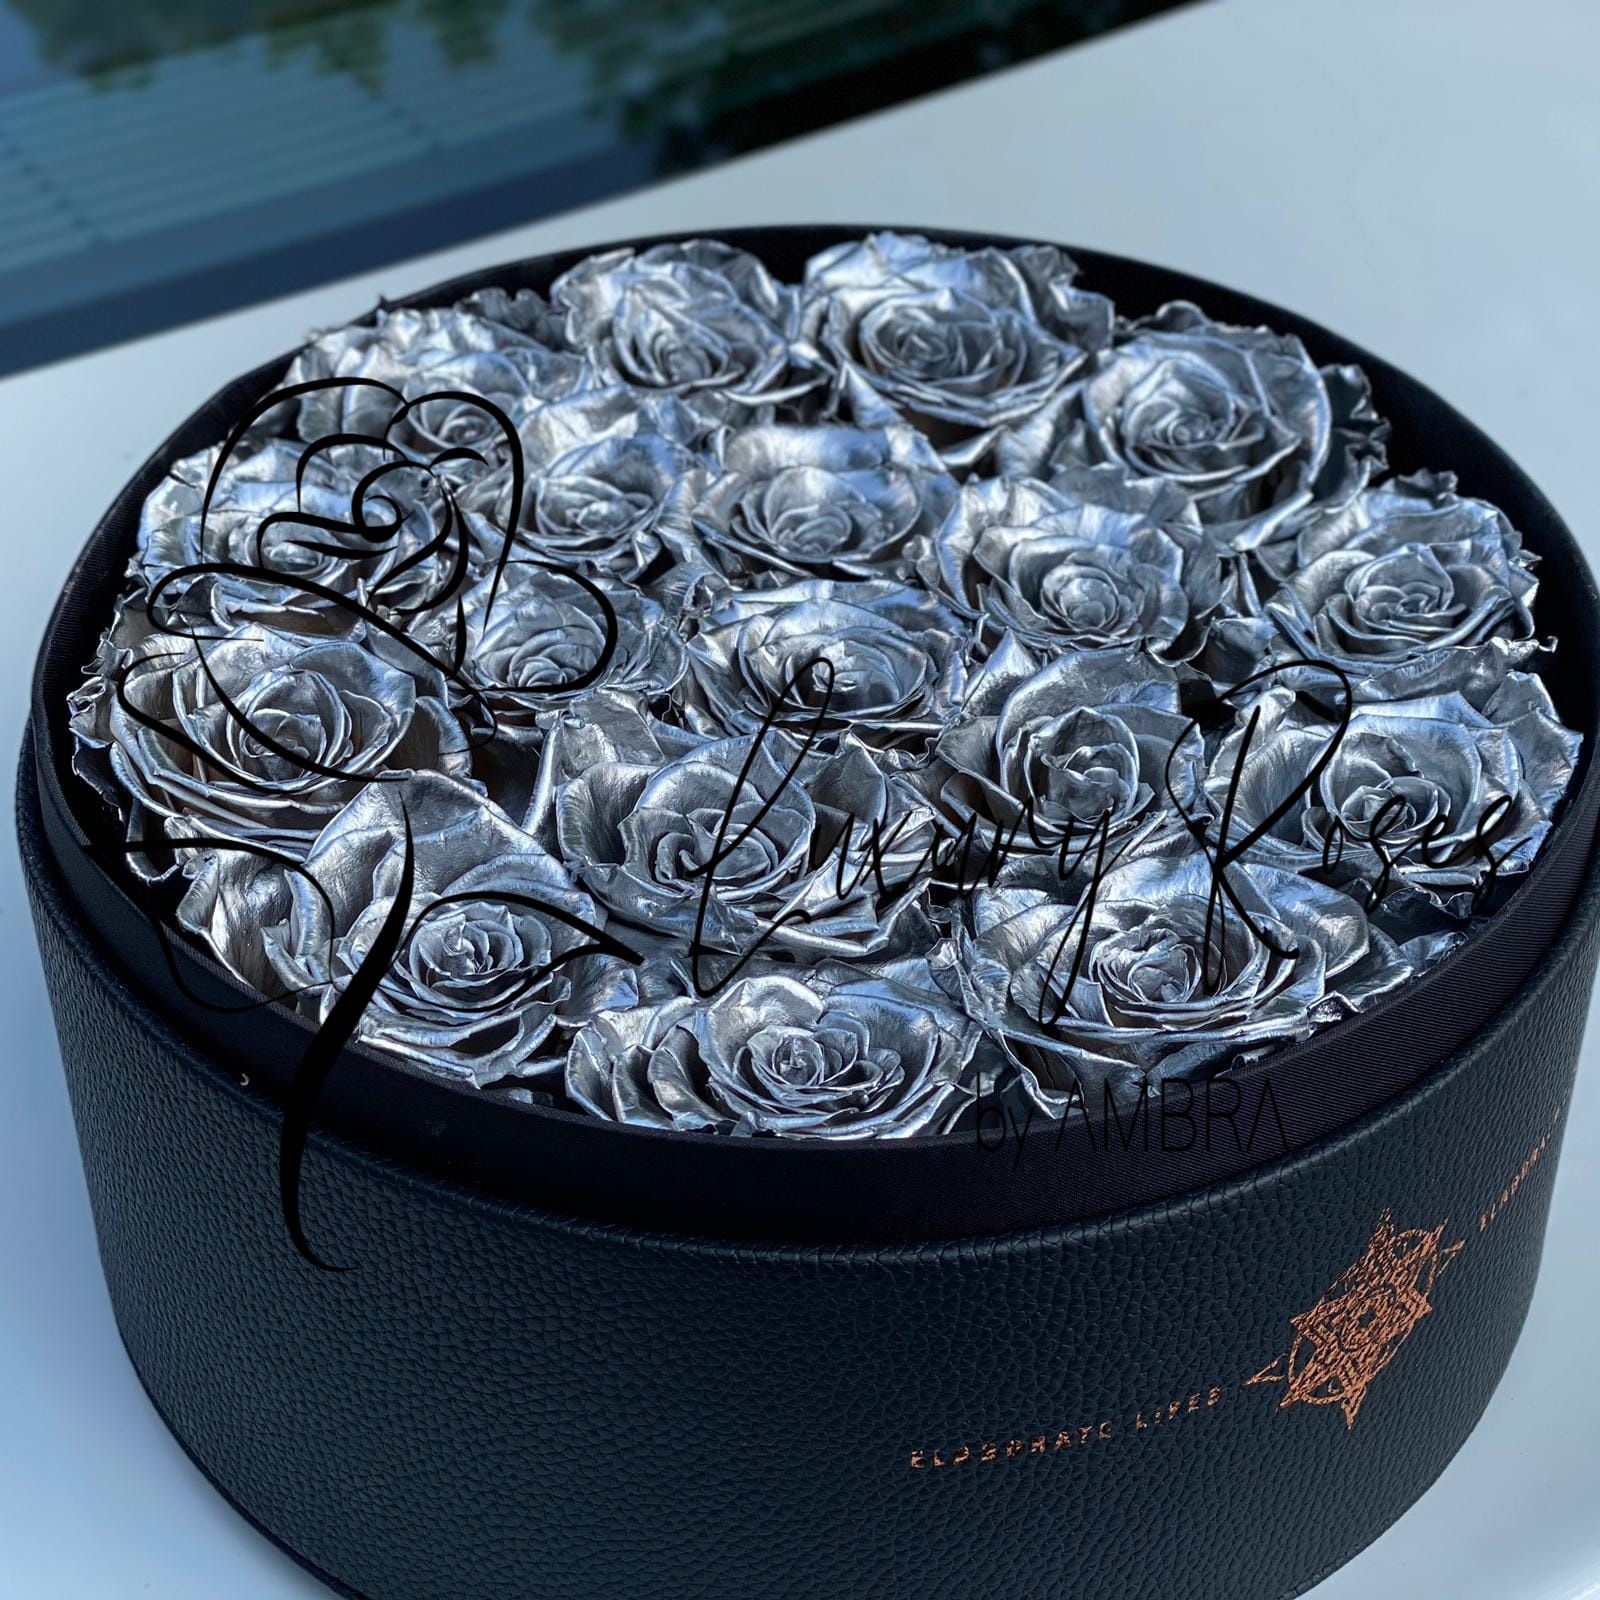 Leather box Eternal Box silver chrome Roses Long Lasting flowers Real Preserved roses Flowers immortal roses Bouquet Anniversary Birthday